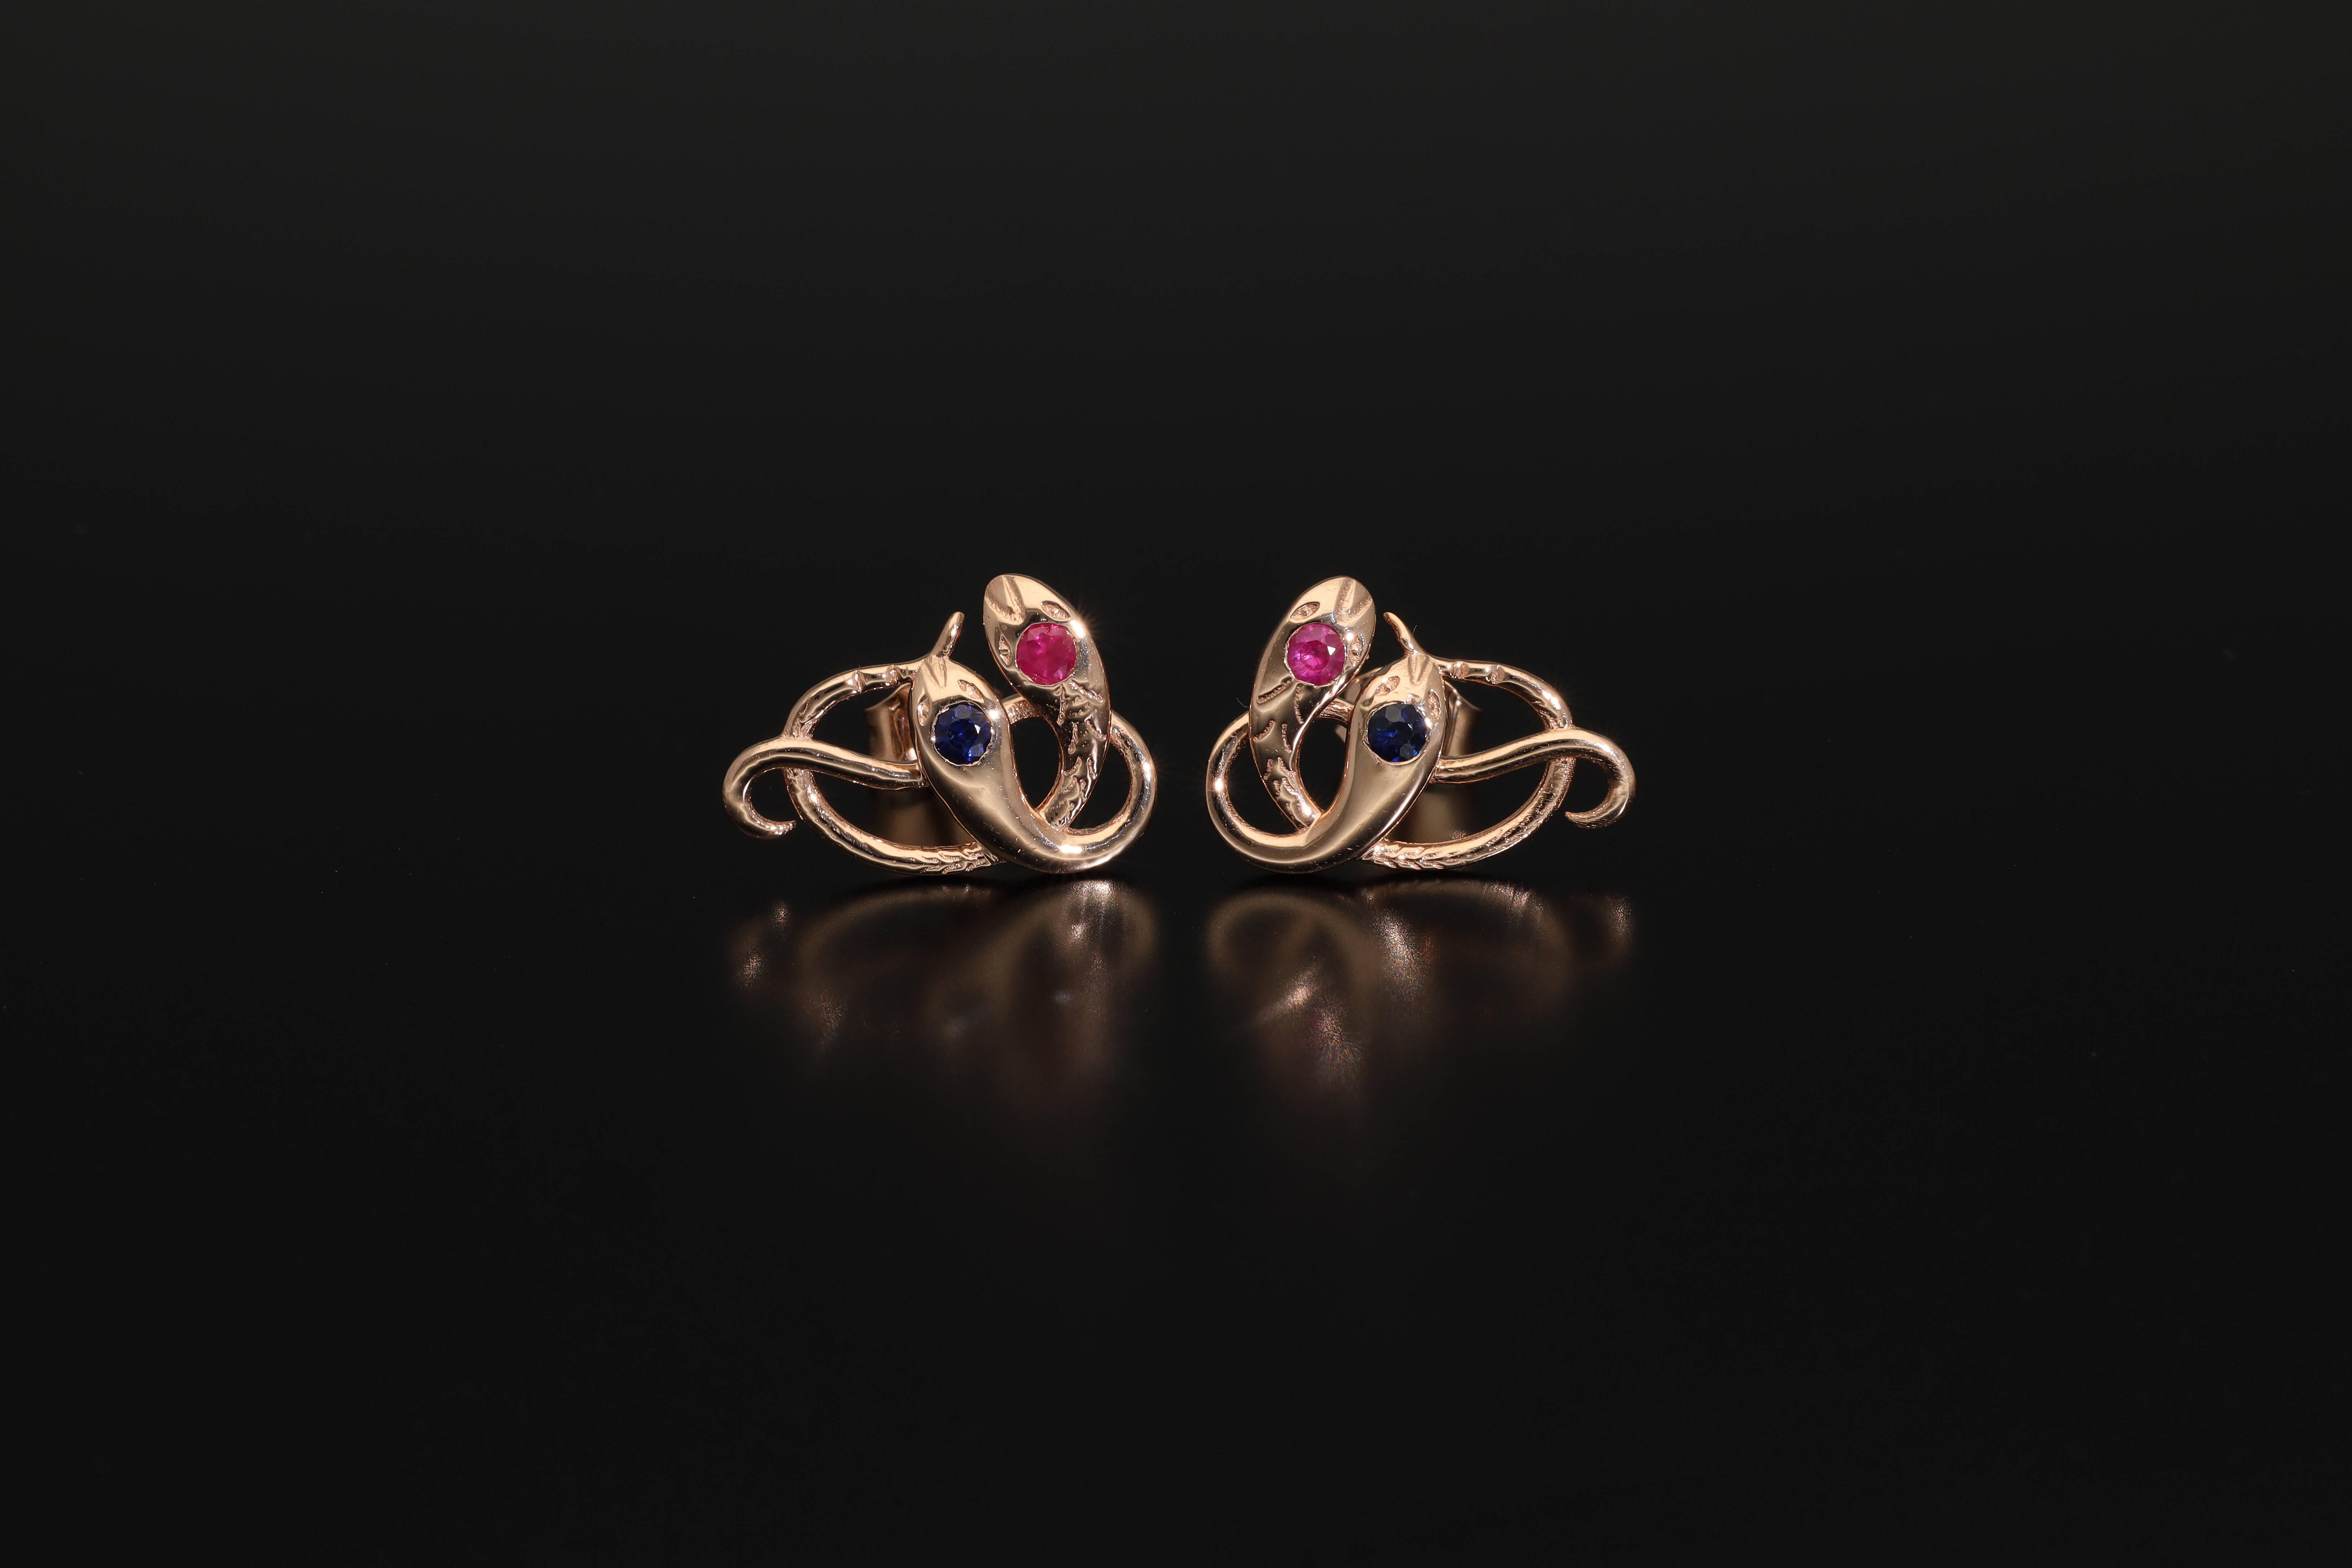 Antique Revival Gold Snake Stud Earrings, Ruby Sapphire Rose Gold Serpent Studs For Sale 1